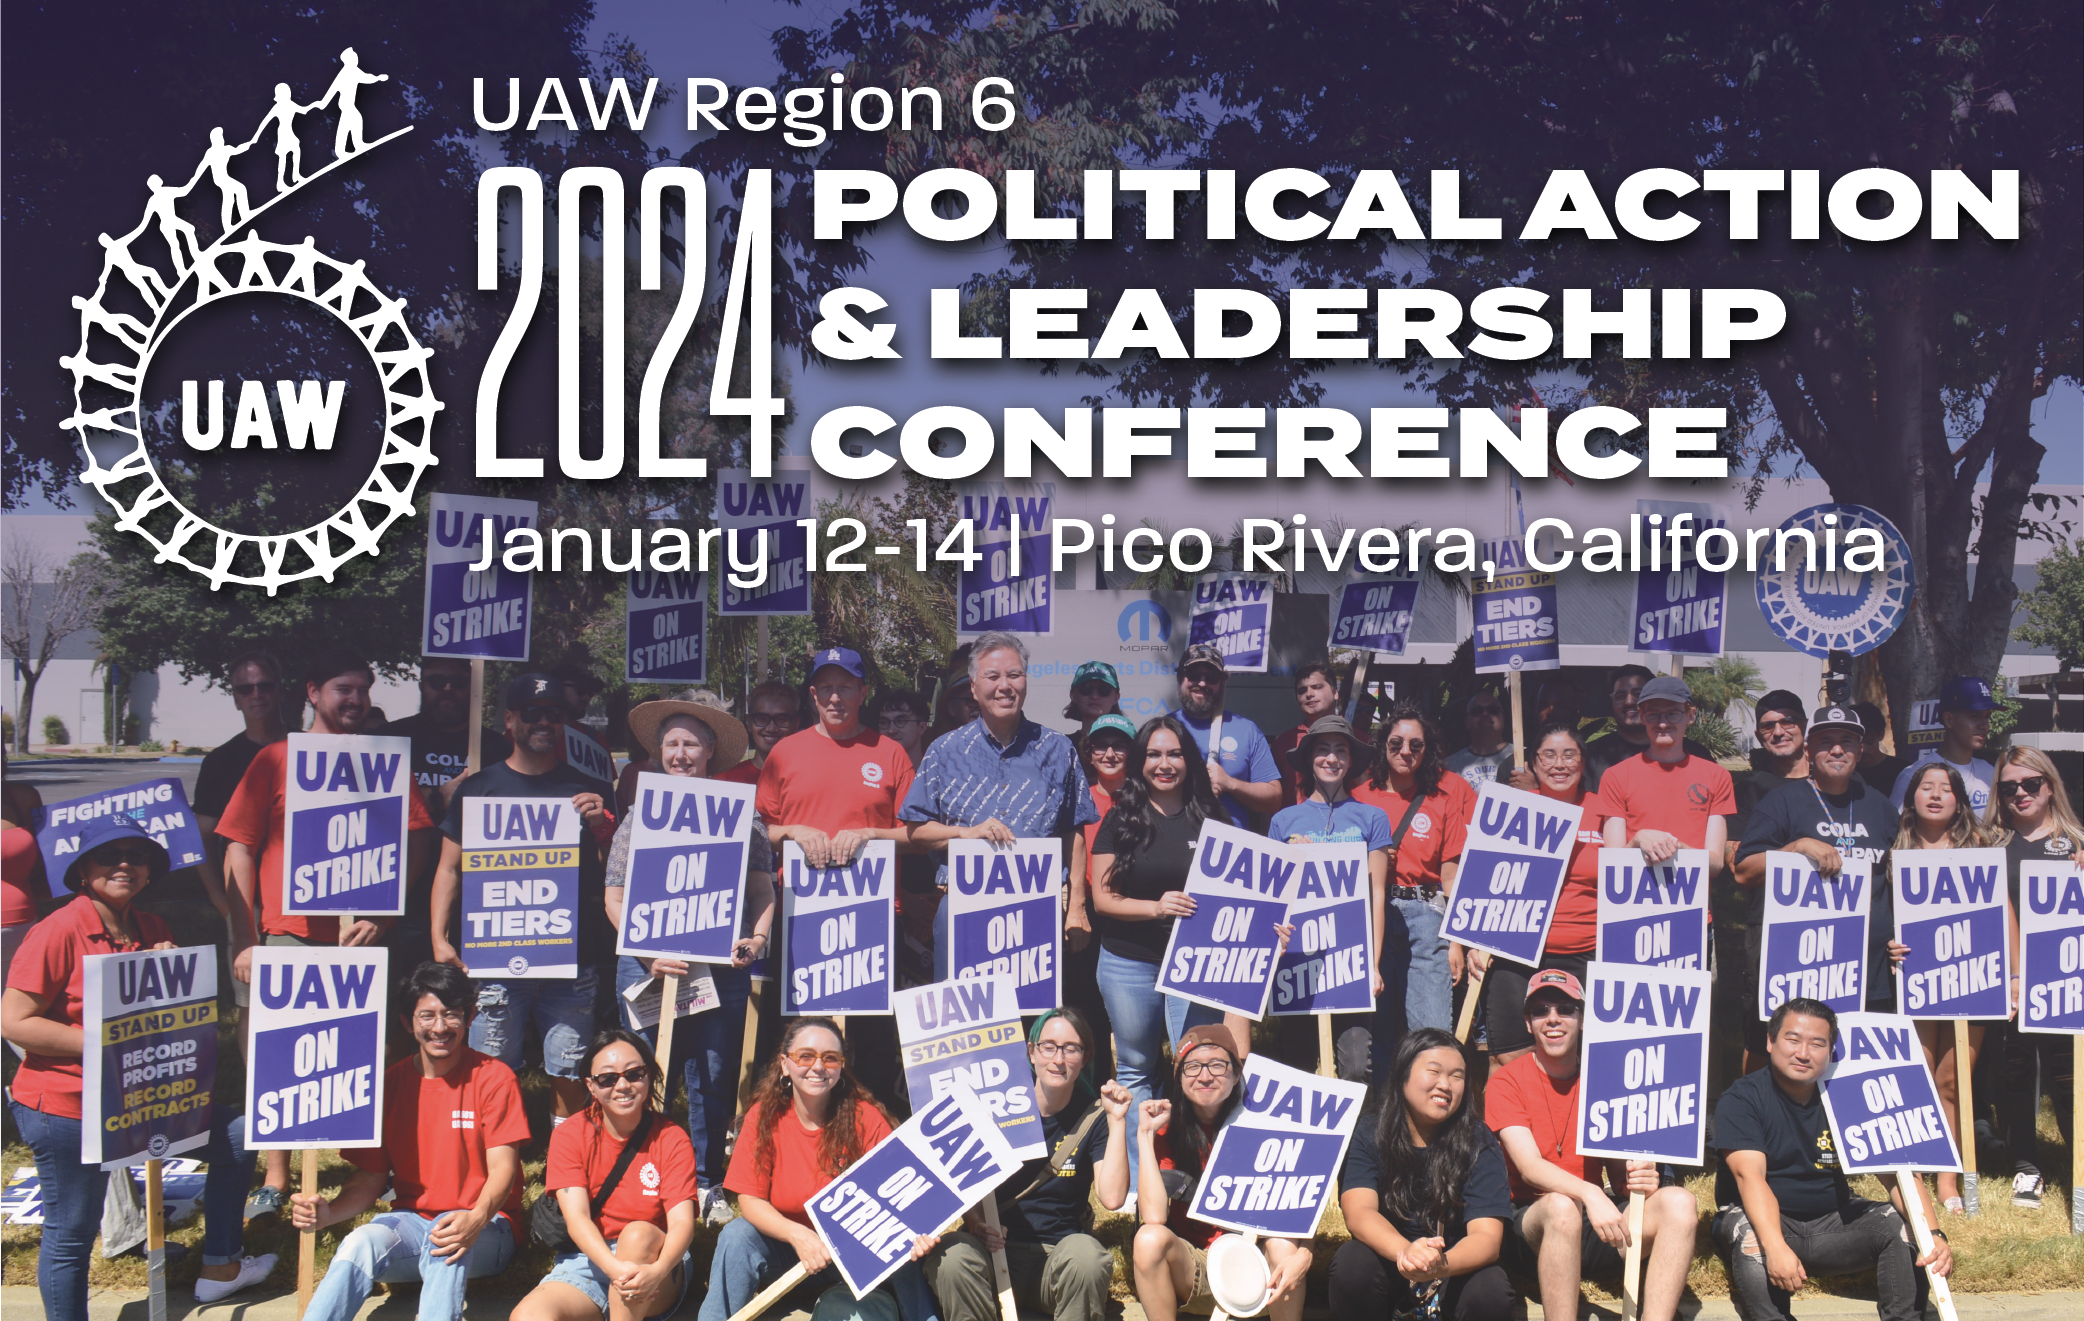 Graphic for 2024 Region 6 Political Action & Leadership Conference over a photo of a large group of UAW members holding picket signs 